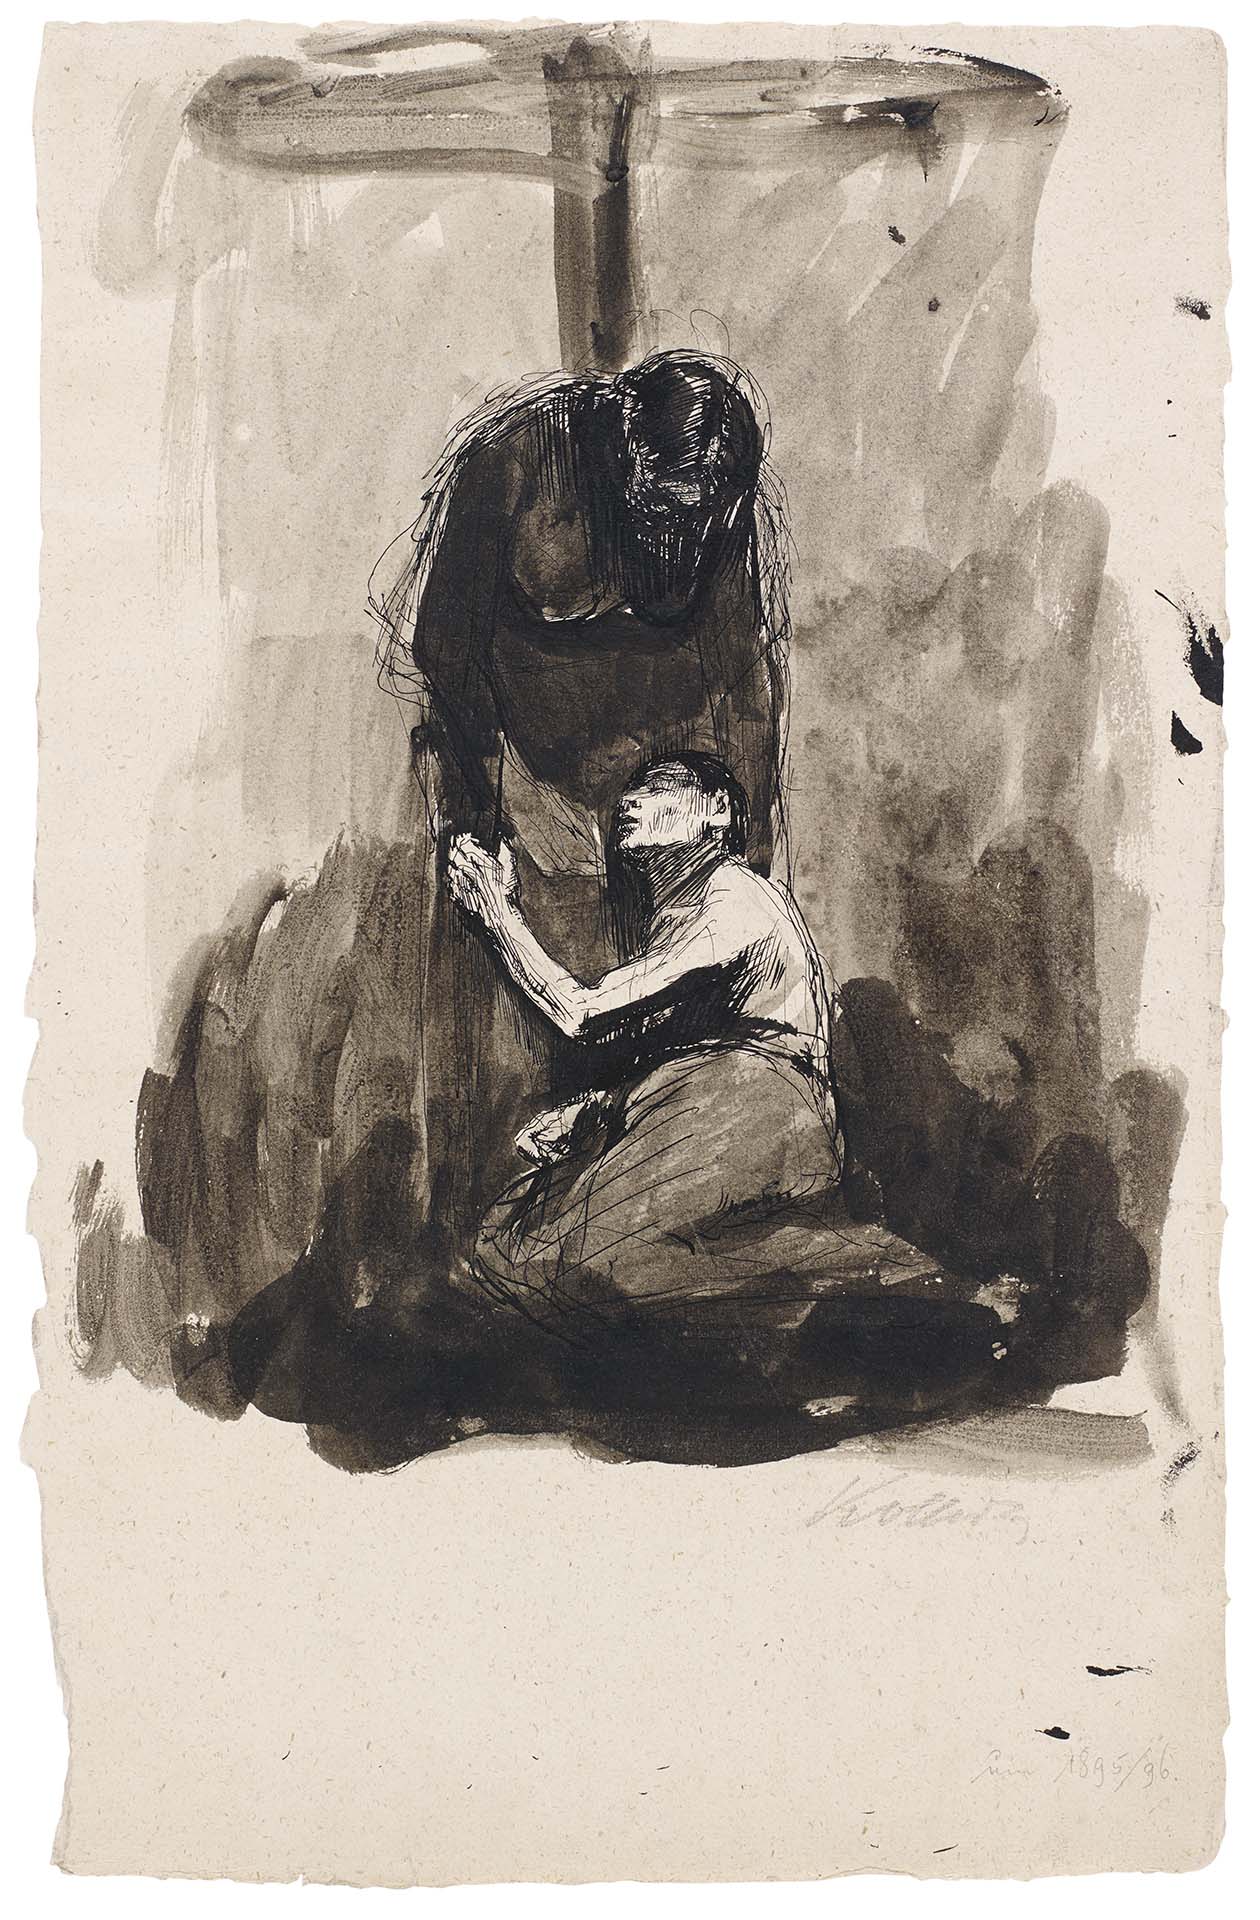 Käthe Kollwitz, A Woman’s Plight (Martyrdom of a Woman), c 1889, pen, brush and ink, washed, on laid paper, NT (17a), Cologne Kollwitz Collection © Käthe Kollwitz Museum Köln